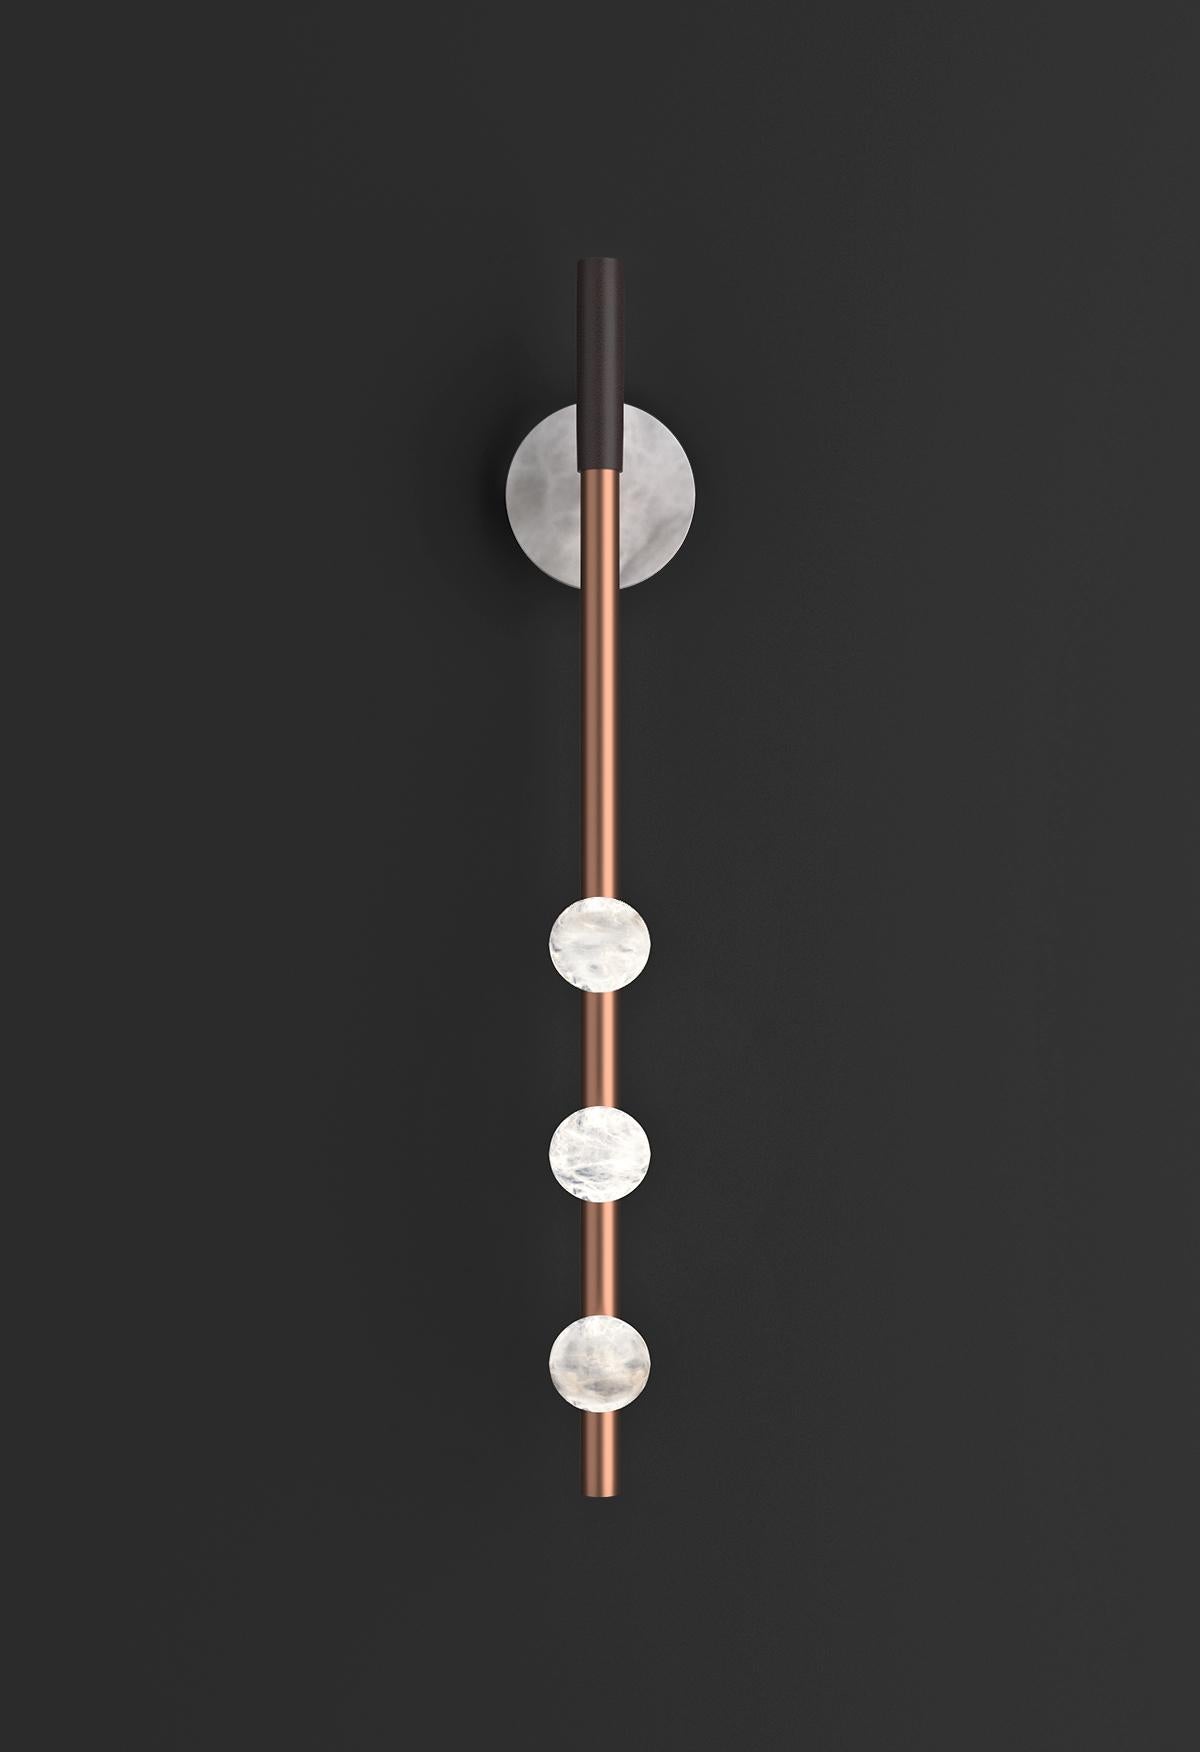 Demetra Copper Wall Lamp by Alabastro Italiano
Dimensions: D 9 x W 10 x H 60 cm.
Materials: White alabaster, copper and leather.

Available in different finishes: Shiny Silver, Bronze, Brushed Brass, Ruggine of Florence, Brushed Burnished, Shiny